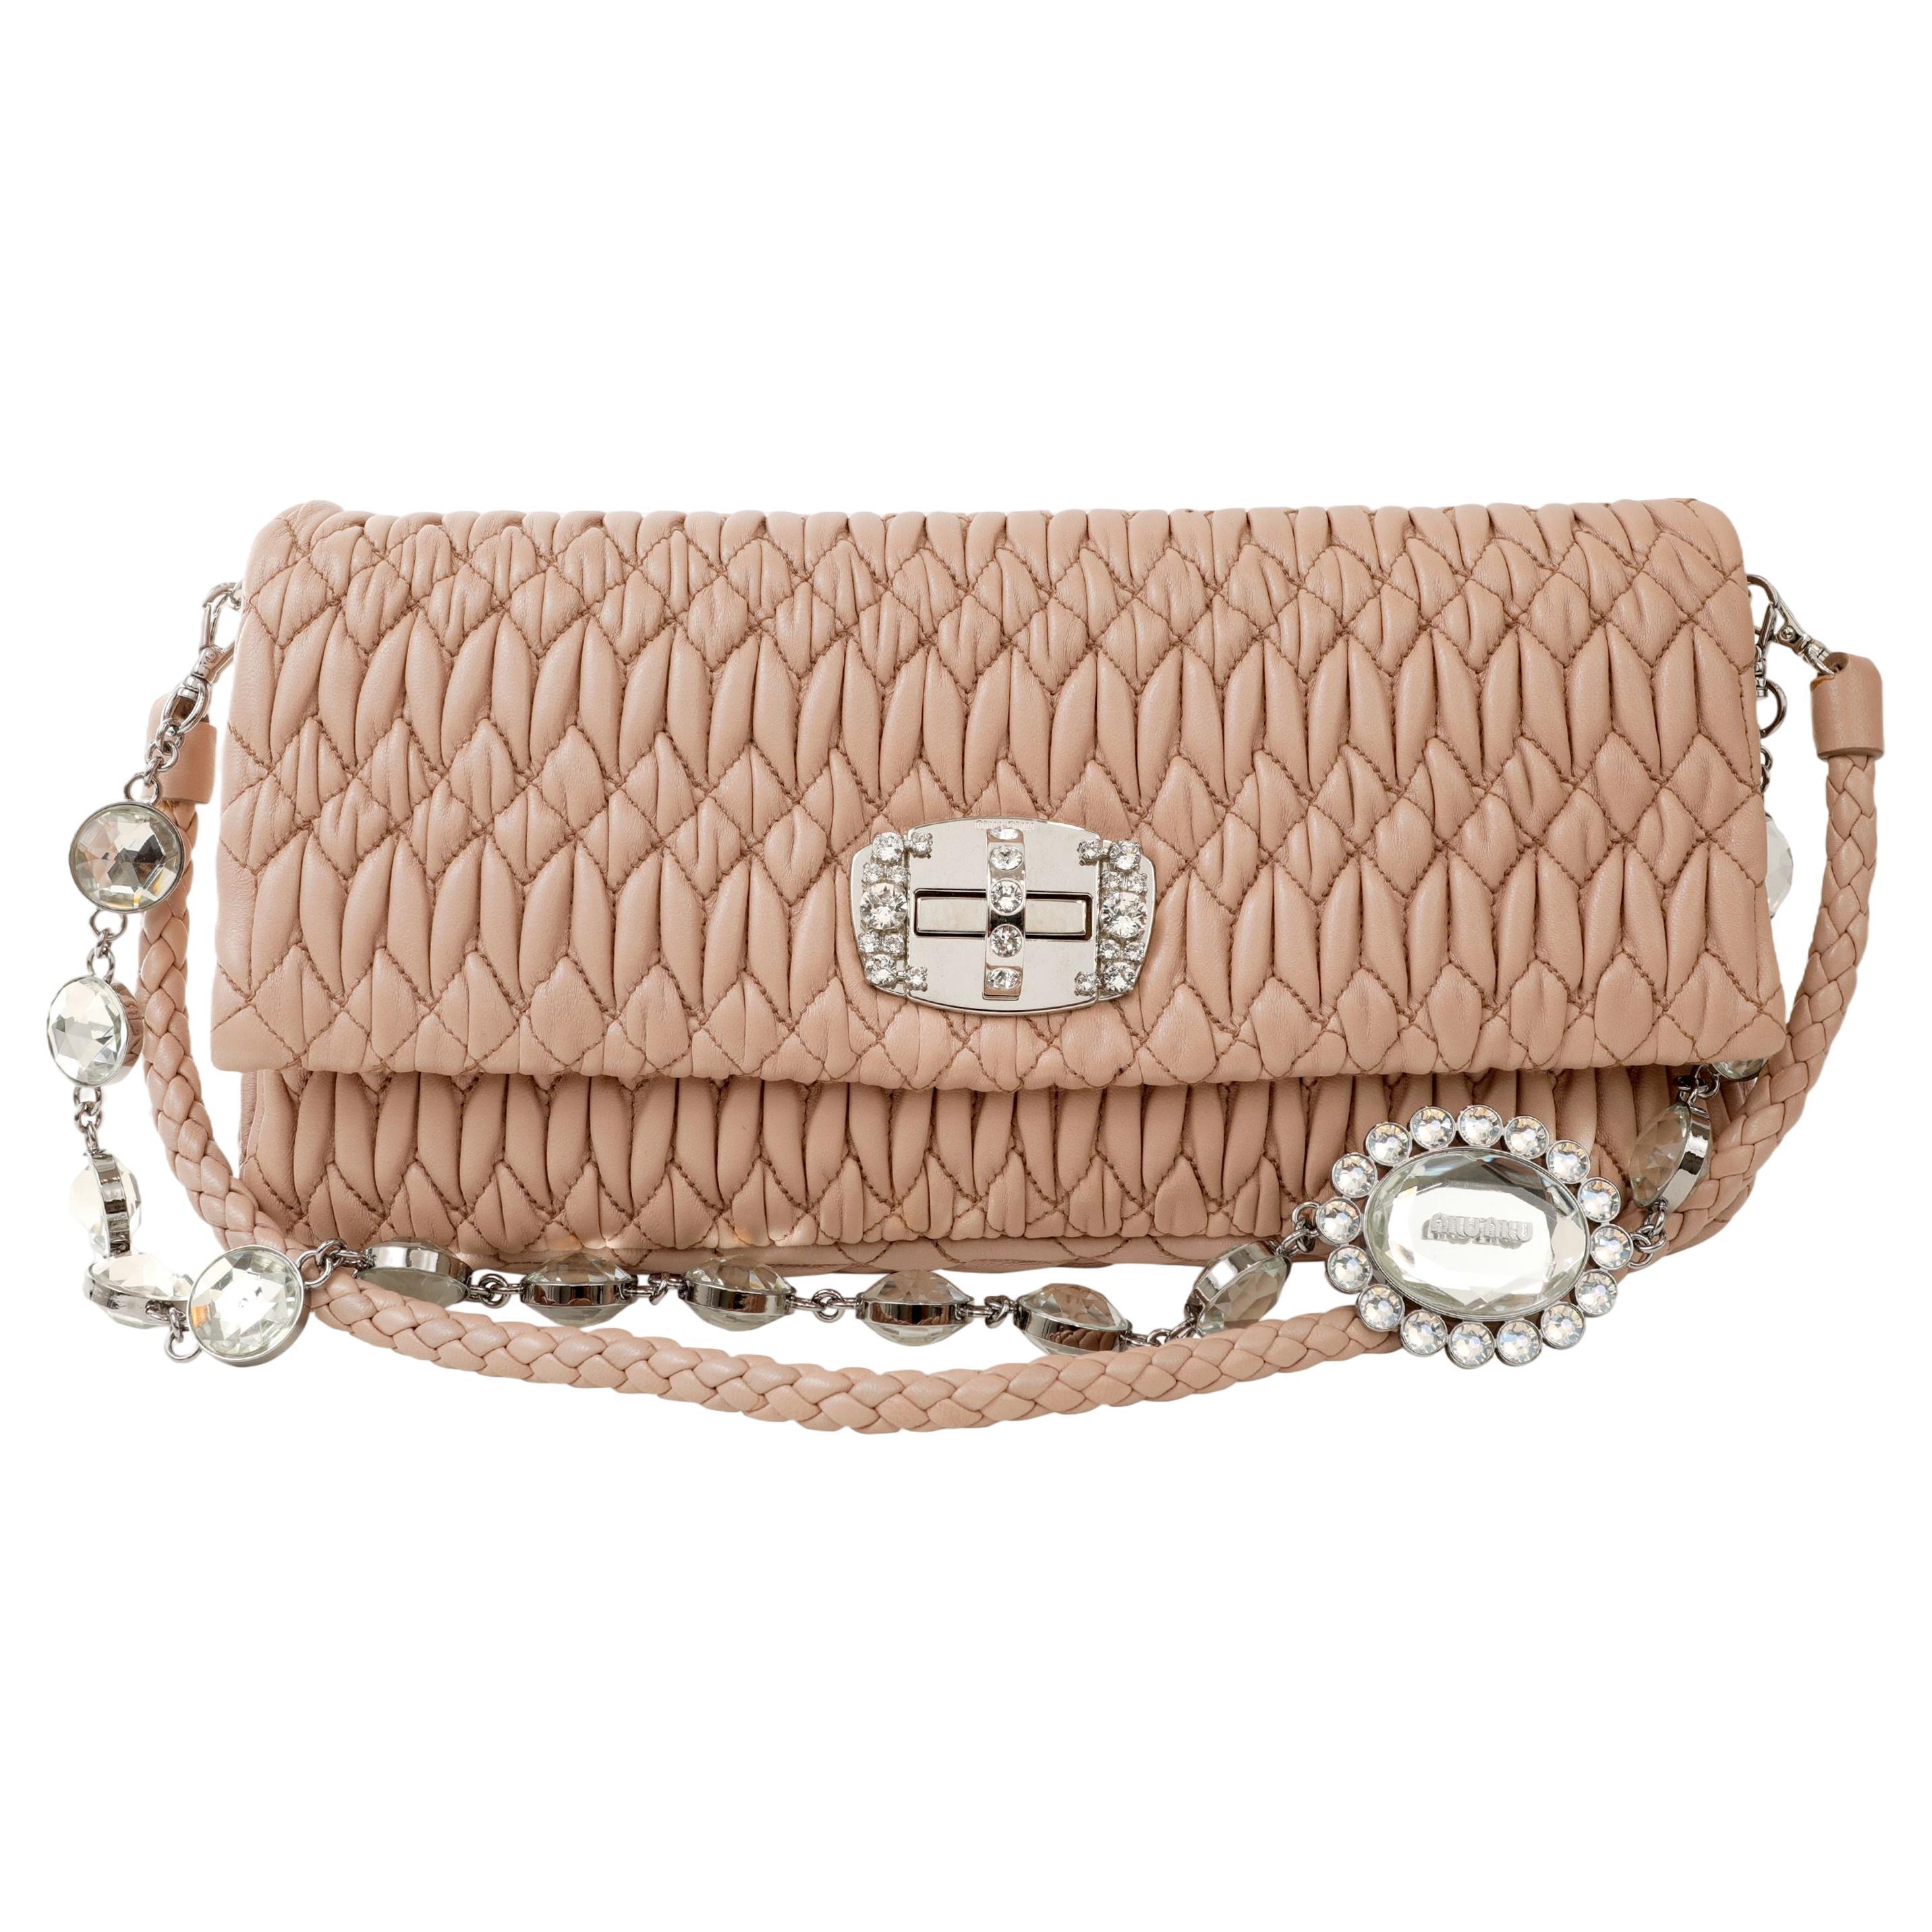 Miu Miu Nude Iconic Crystal Cloquè Small Bag with Silver Hardware For Sale